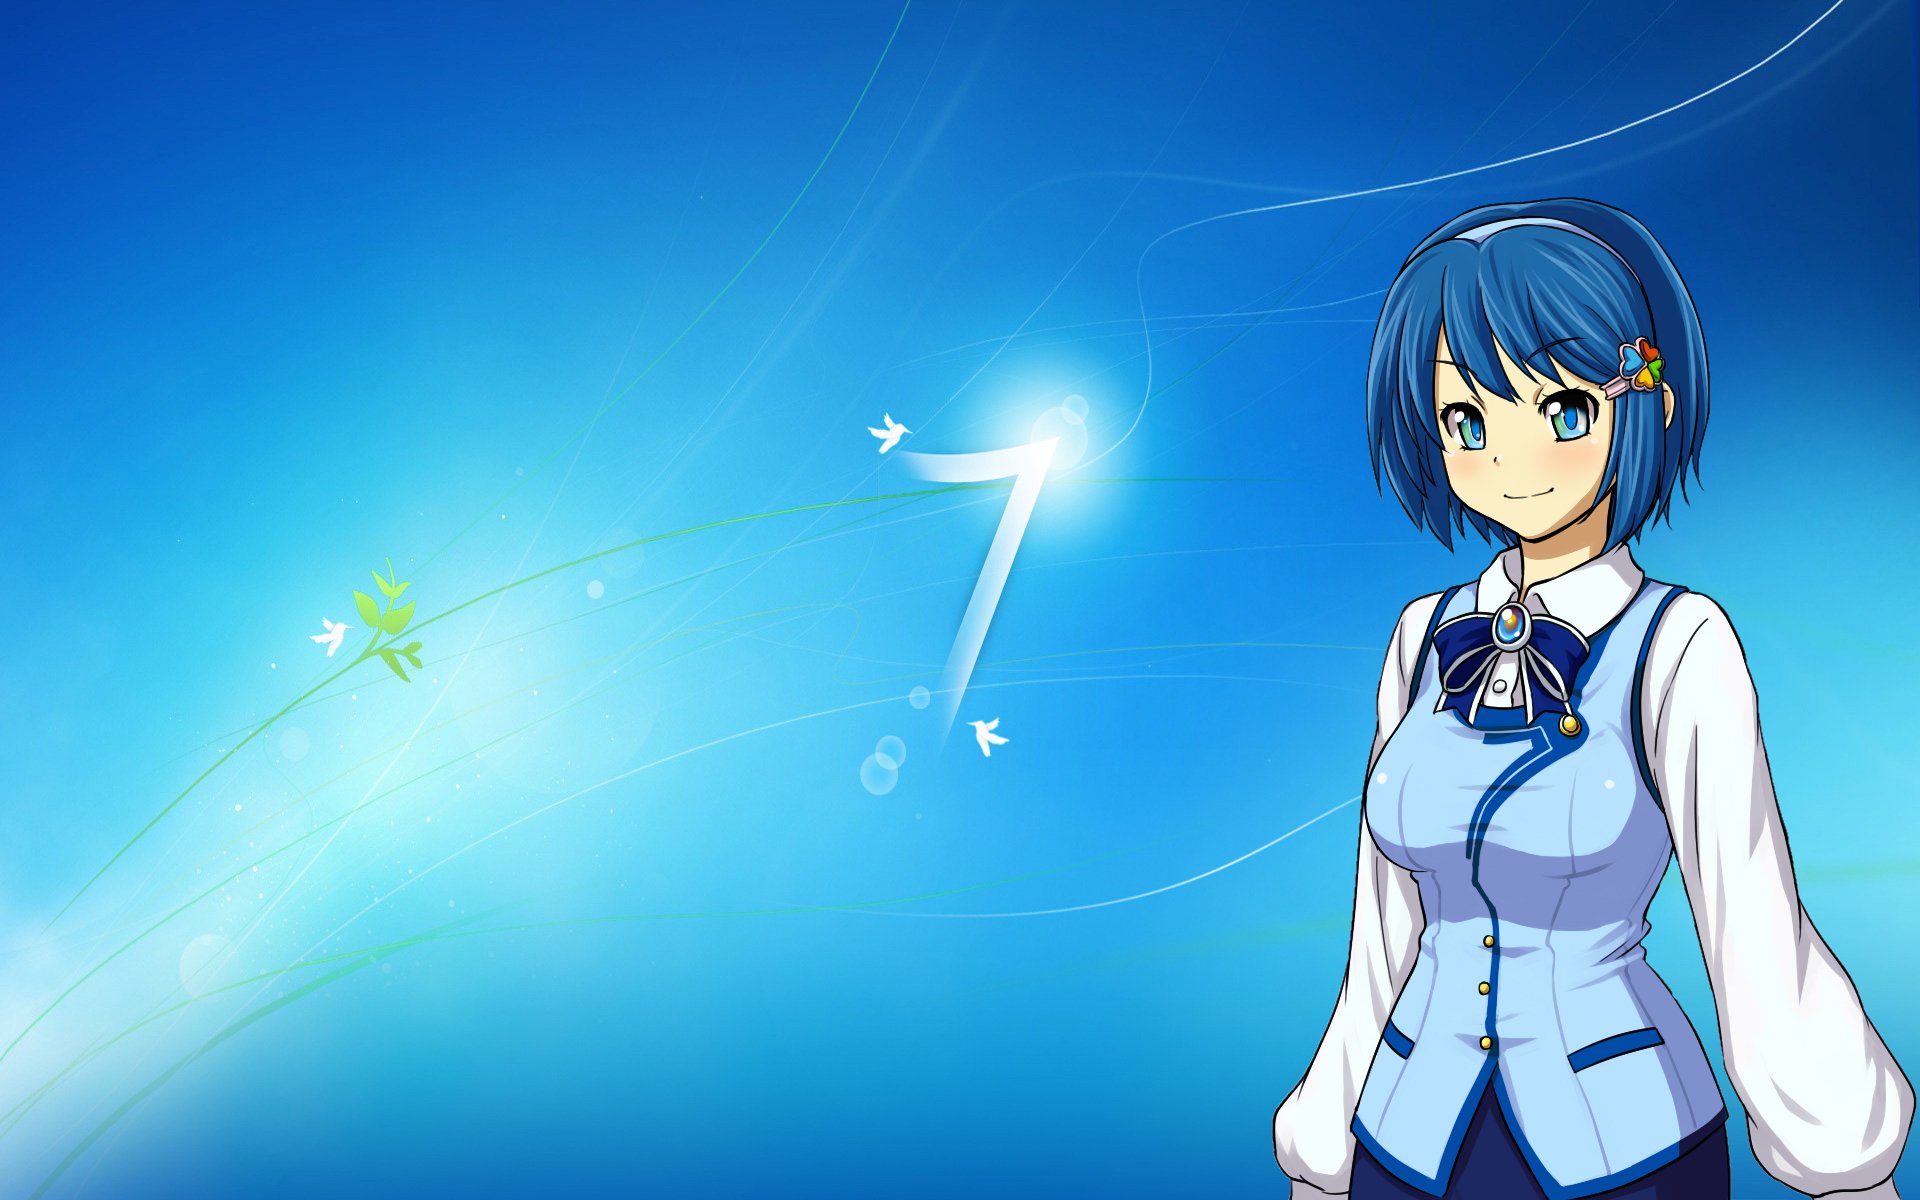  Please contact us if you want to publish a windows anime wallpaper on our site 28+  Windows 10